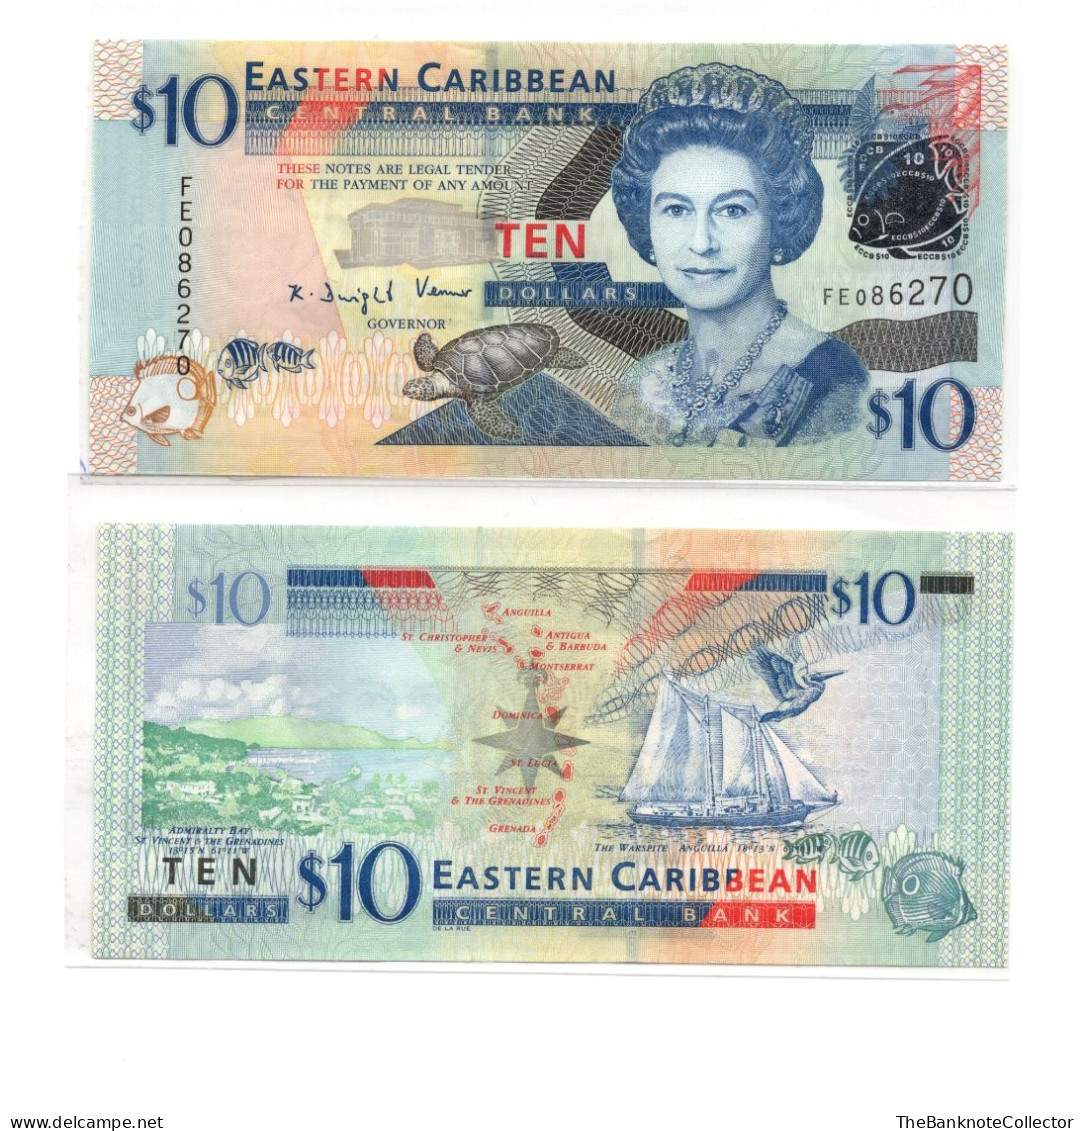 Eastern Caribbean Central Bank 10 Dollars ND 2008 QEII P-48 UNC - Caribes Orientales